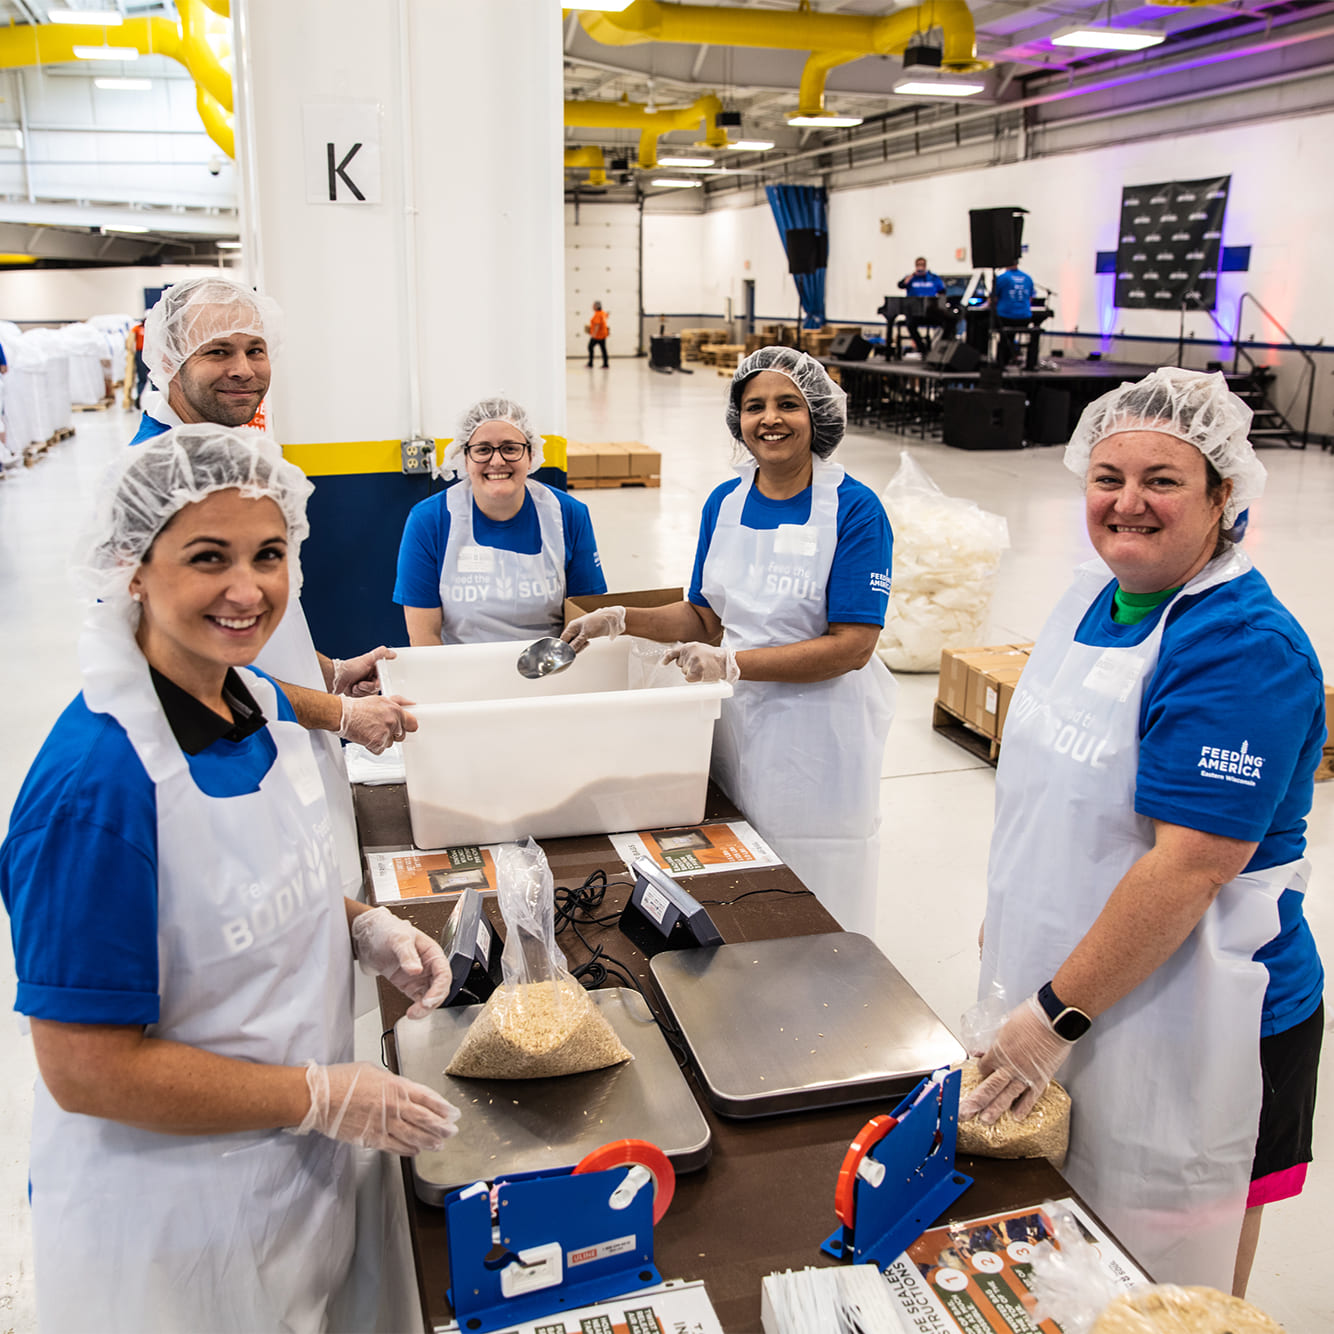 Team members at a rice packing table wearing hair nets and aprons